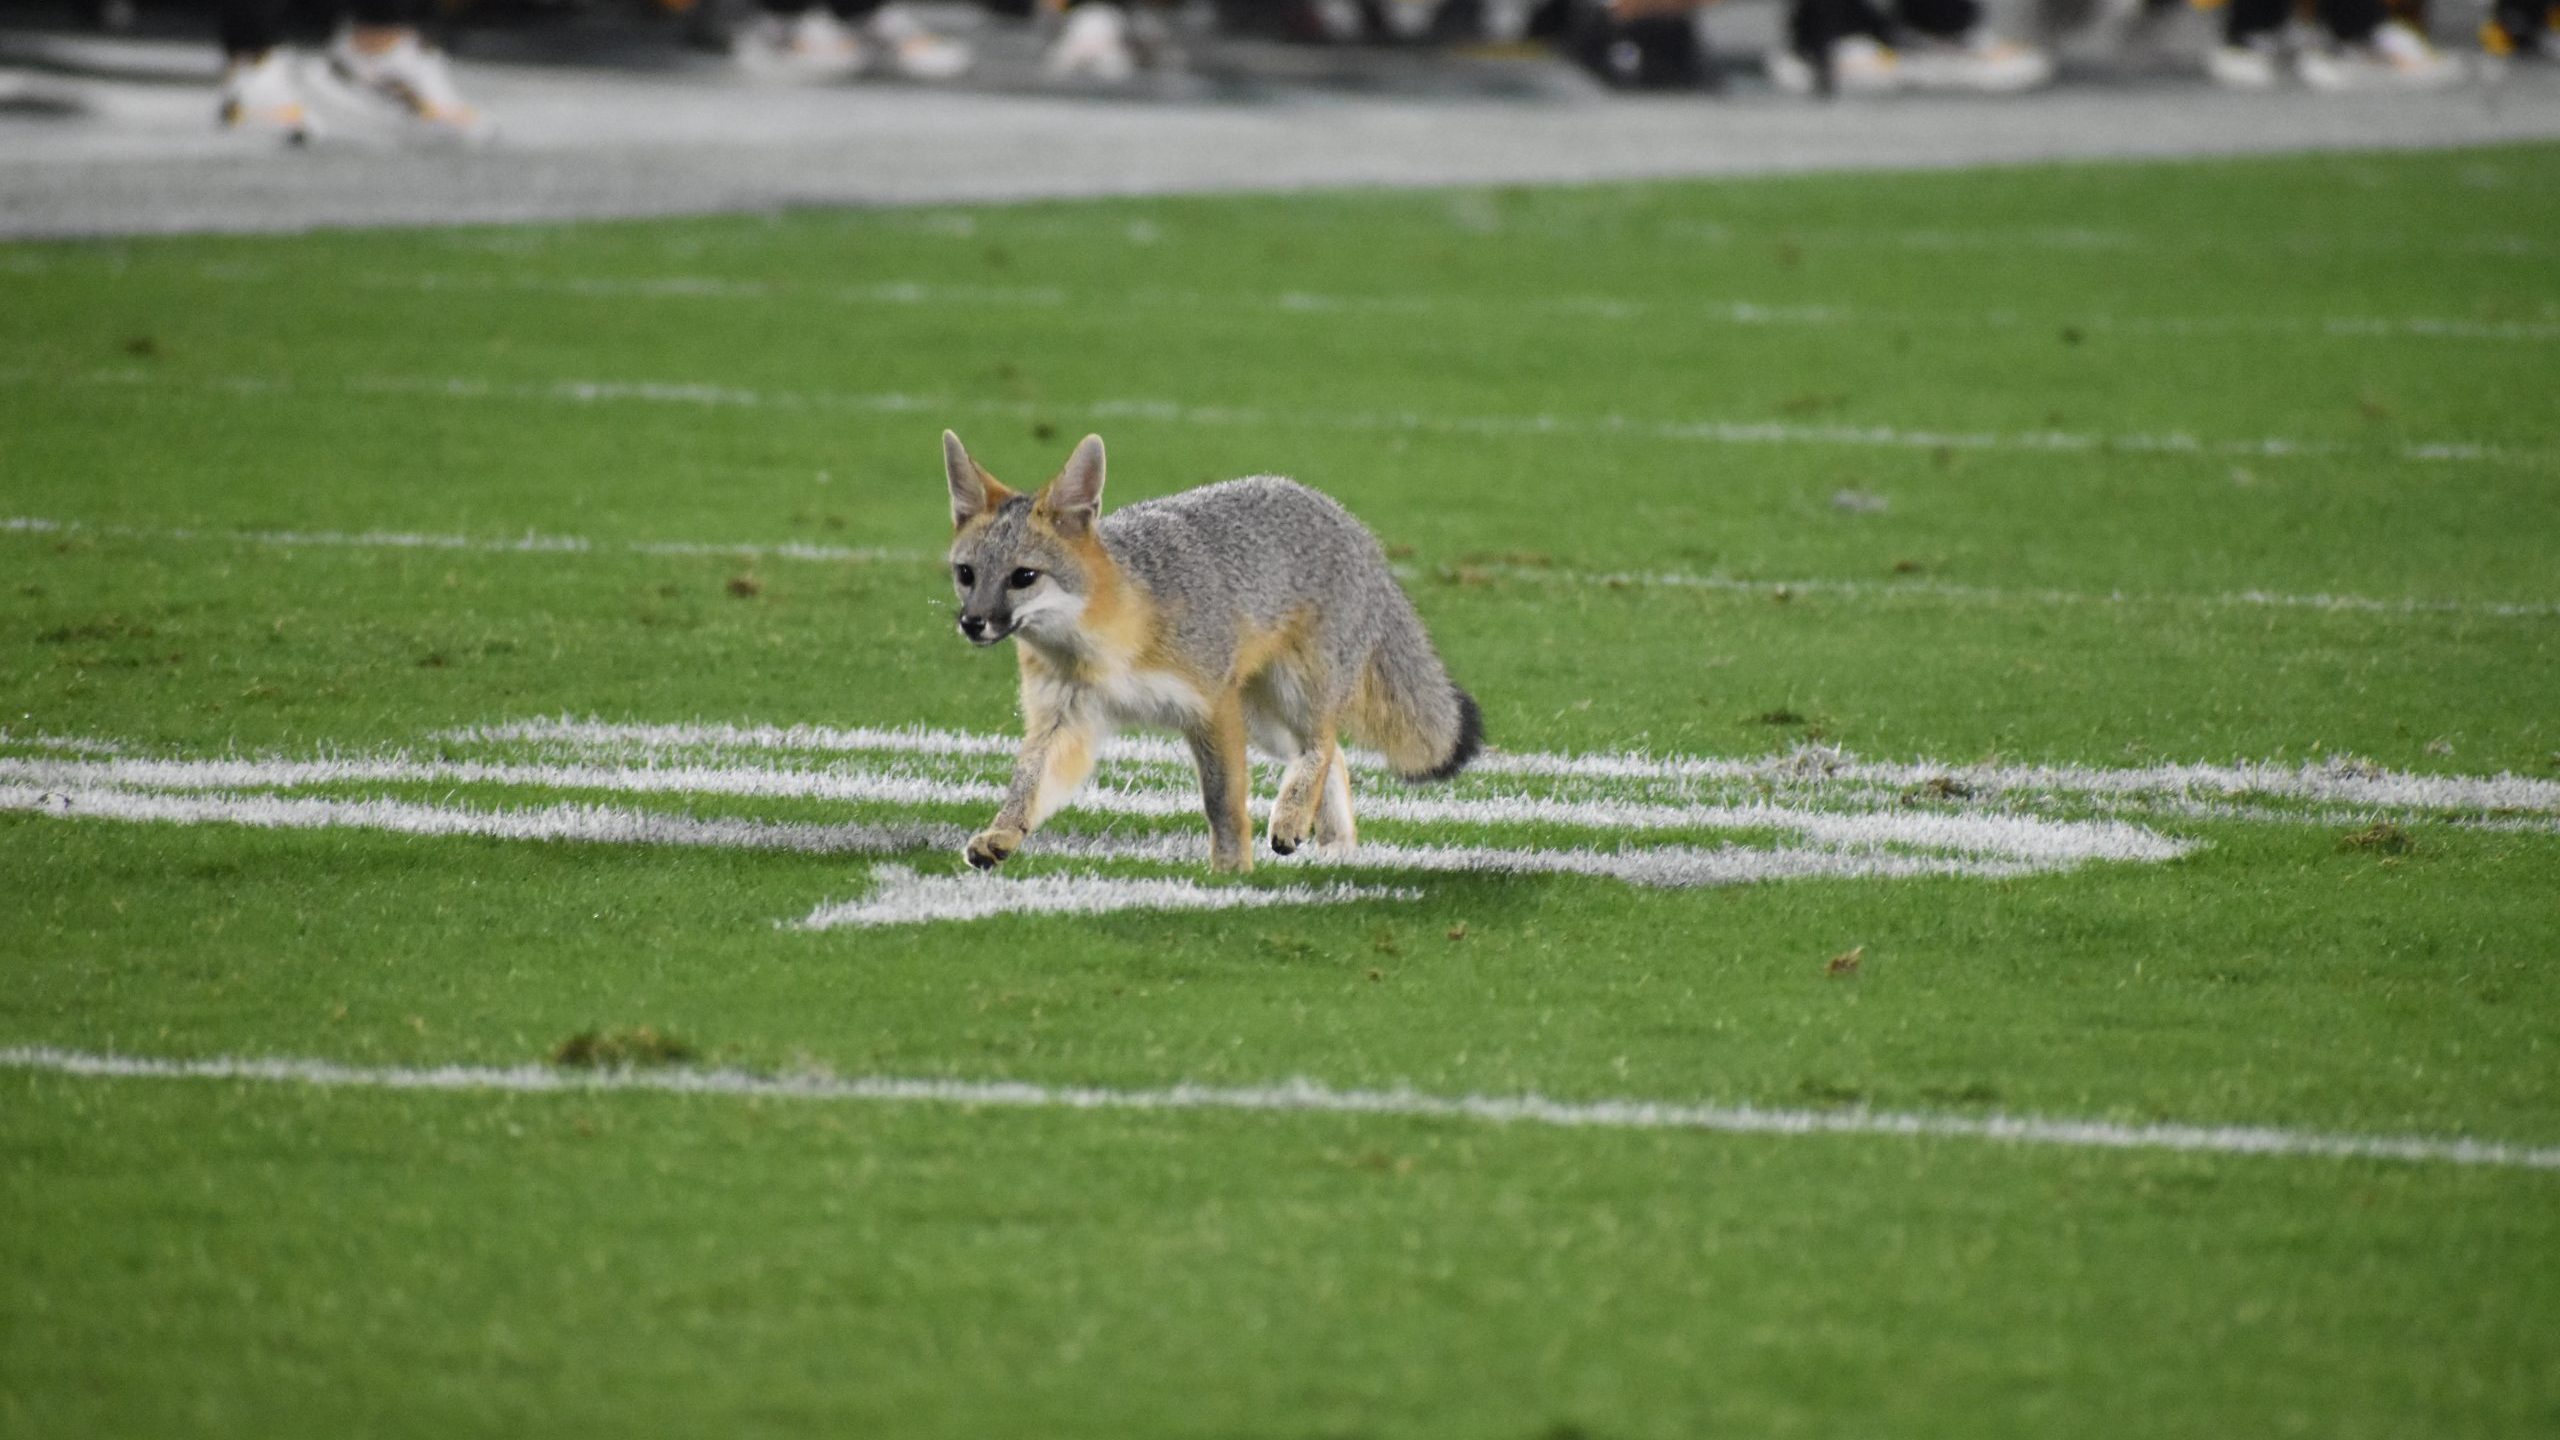 A fox enters the field of play during Arizona State's victory against the USC Trojans on Nov. 6, 20...